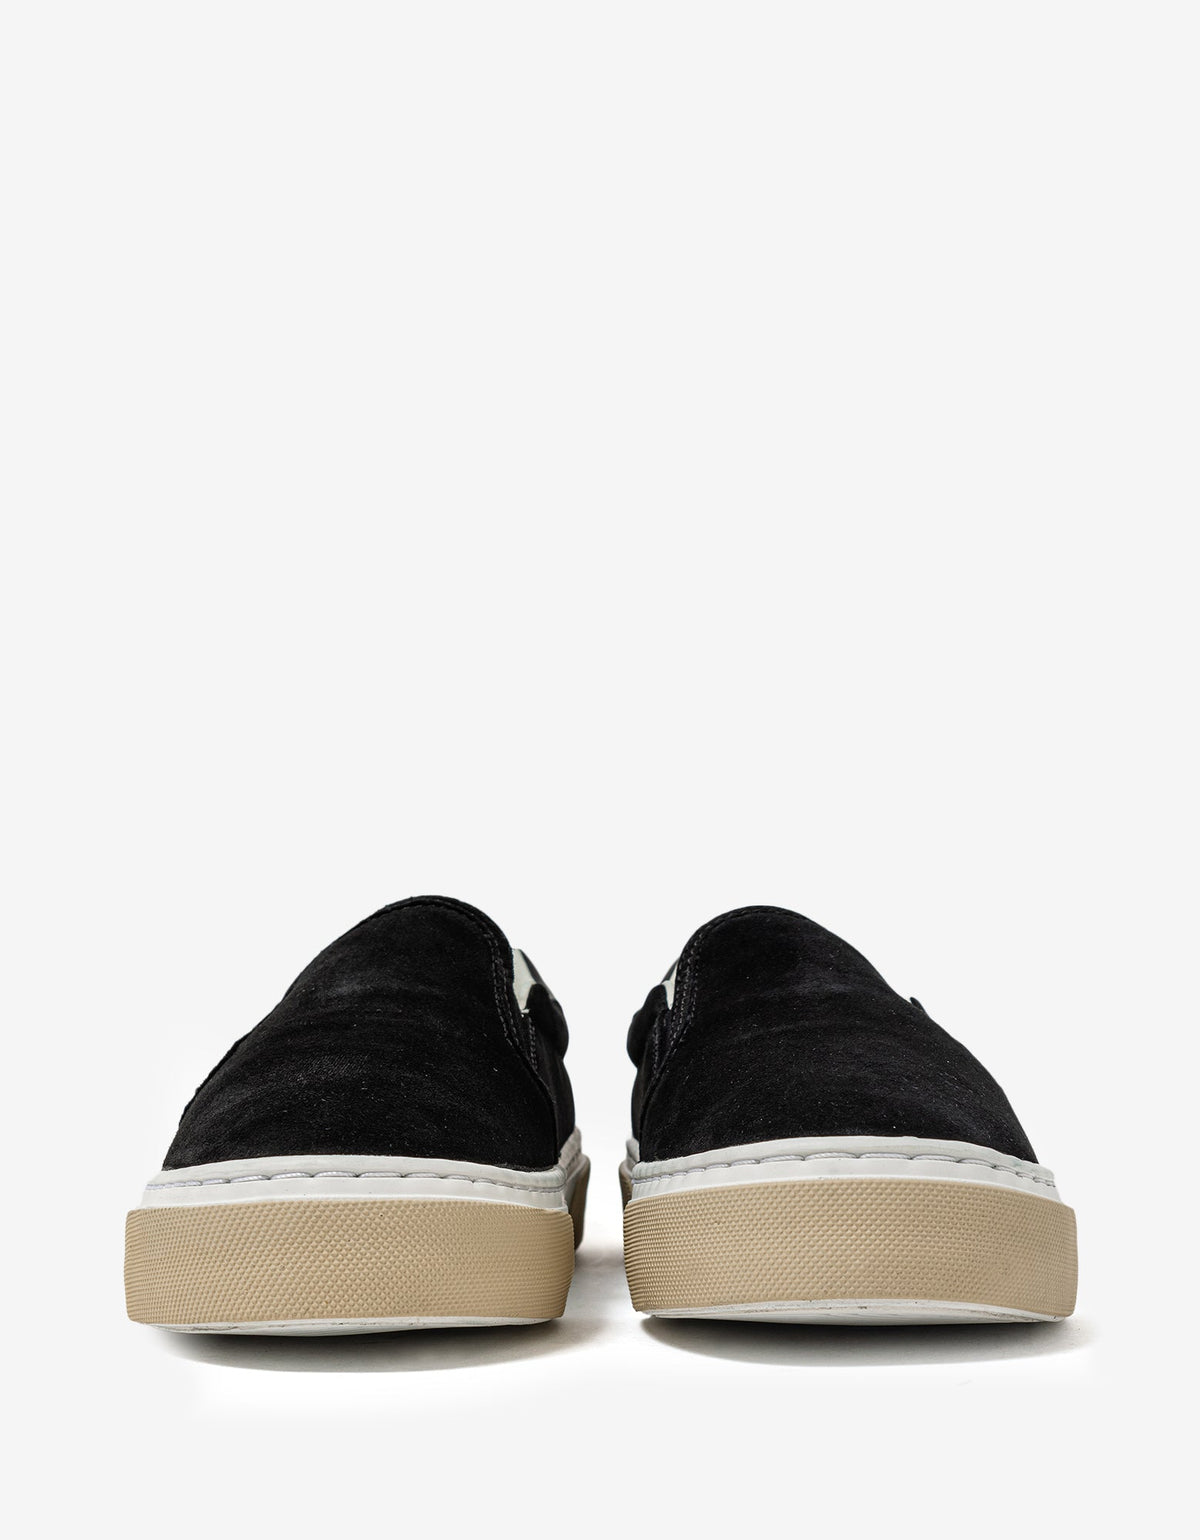 Palm Angels Black Suede Slip On Trainers